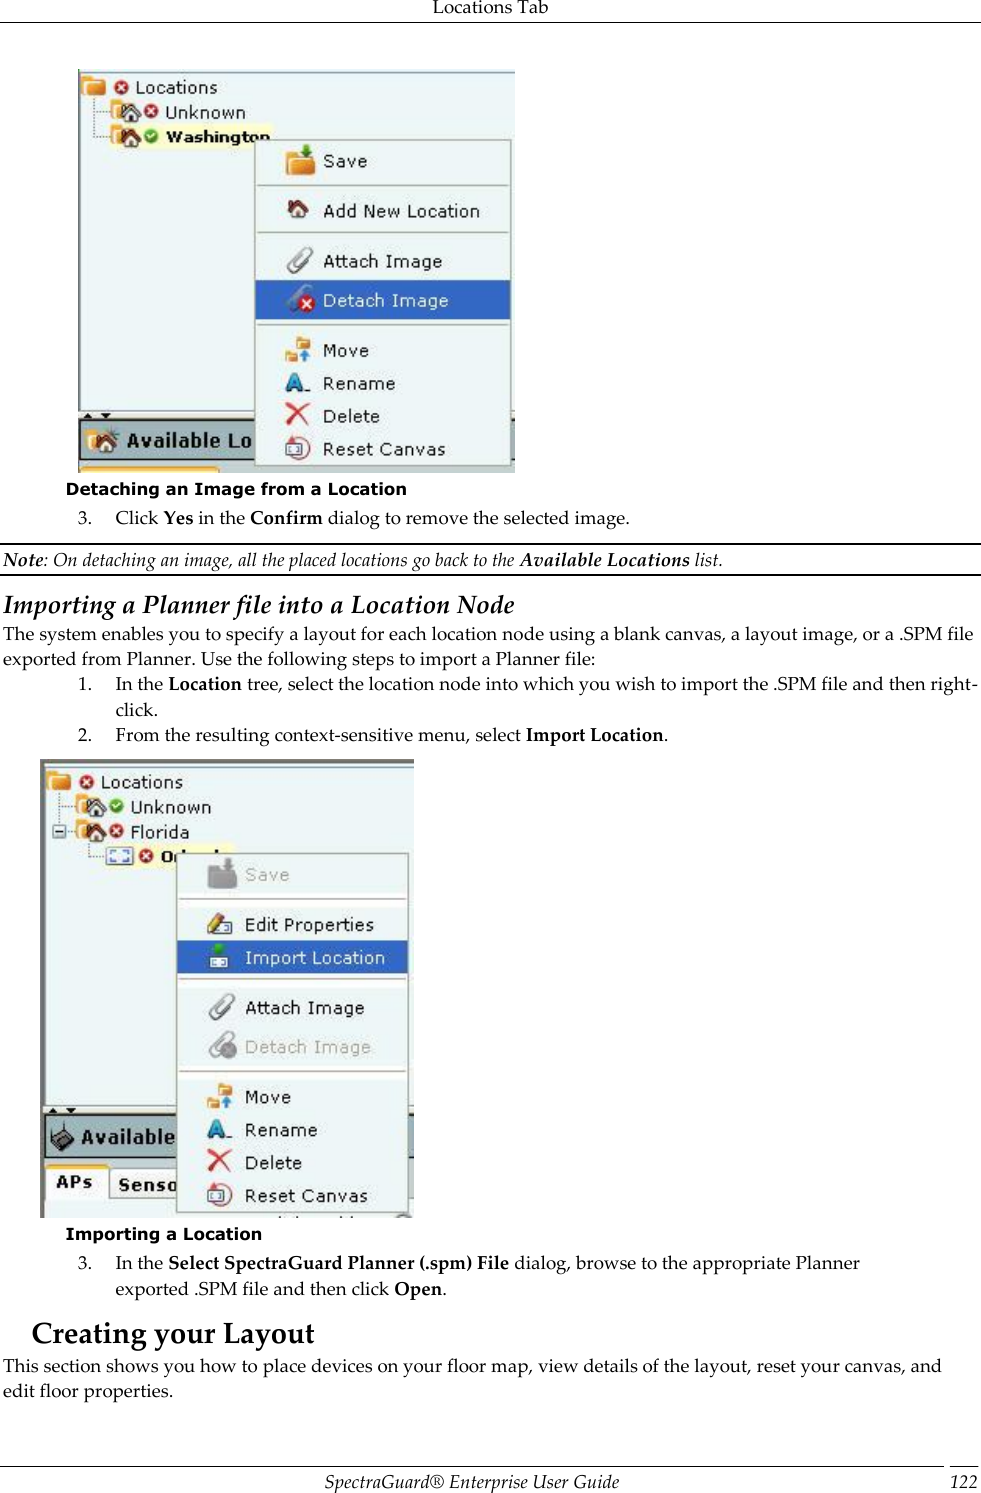 Locations Tab SpectraGuard®  Enterprise User Guide 122  Detaching an Image from a Location 3. Click Yes in the Confirm dialog to remove the selected image. Note: On detaching an image, all the placed locations go back to the Available Locations list. Importing a Planner file into a Location Node The system enables you to specify a layout for each location node using a blank canvas, a layout image, or a .SPM file exported from Planner. Use the following steps to import a Planner file: 1. In the Location tree, select the location node into which you wish to import the .SPM file and then right-click. 2. From the resulting context-sensitive menu, select Import Location.  Importing a Location 3. In the Select SpectraGuard Planner (.spm) File dialog, browse to the appropriate Planner exported .SPM file and then click Open. Creating your Layout This section shows you how to place devices on your floor map, view details of the layout, reset your canvas, and edit floor properties. 